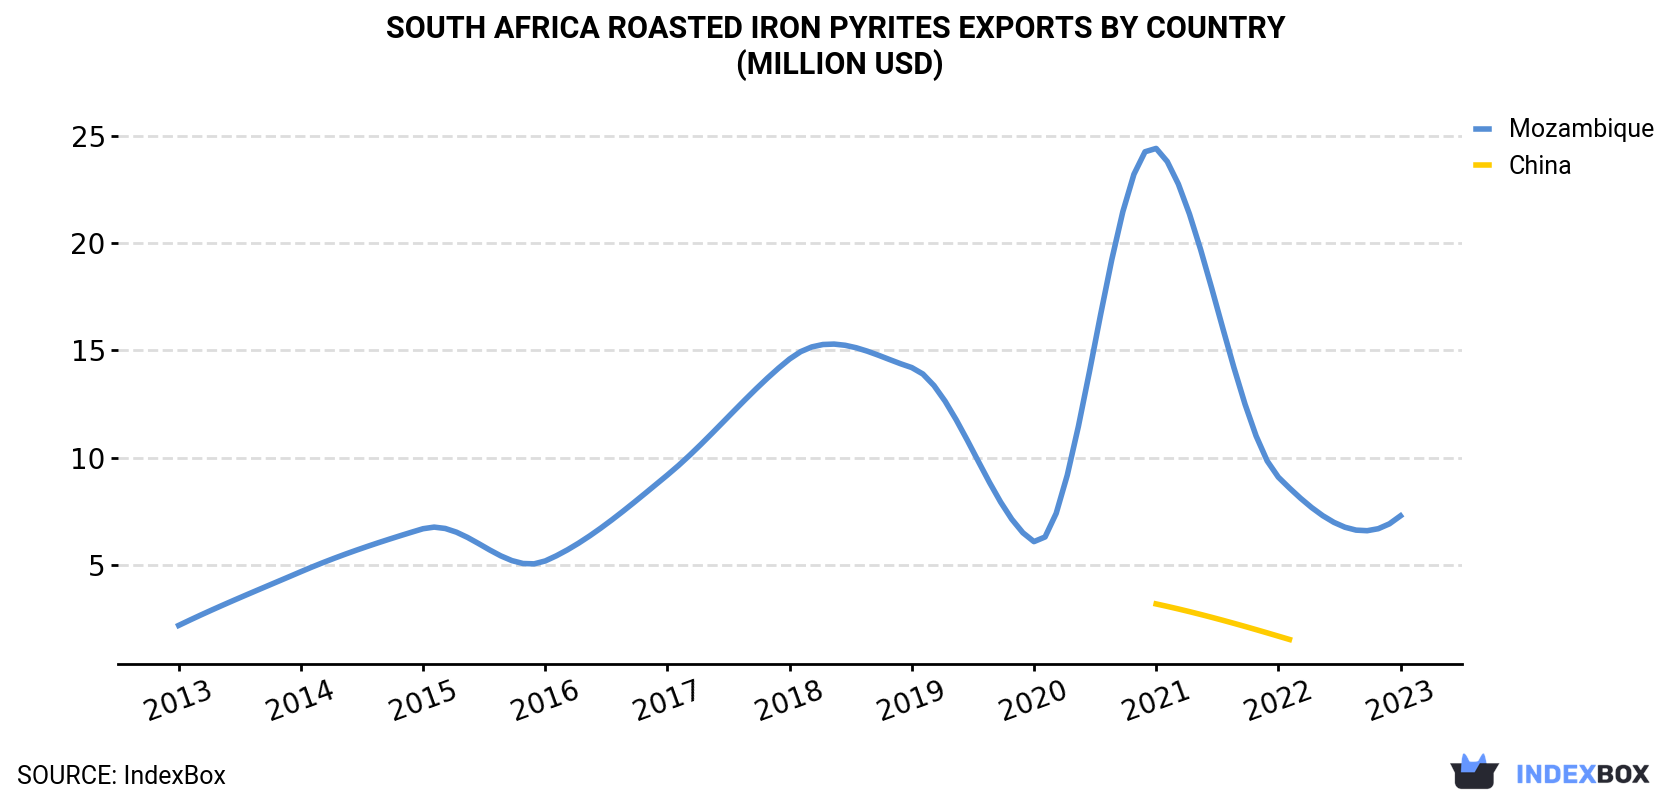 South Africa Roasted Iron Pyrites Exports By Country (Million USD)